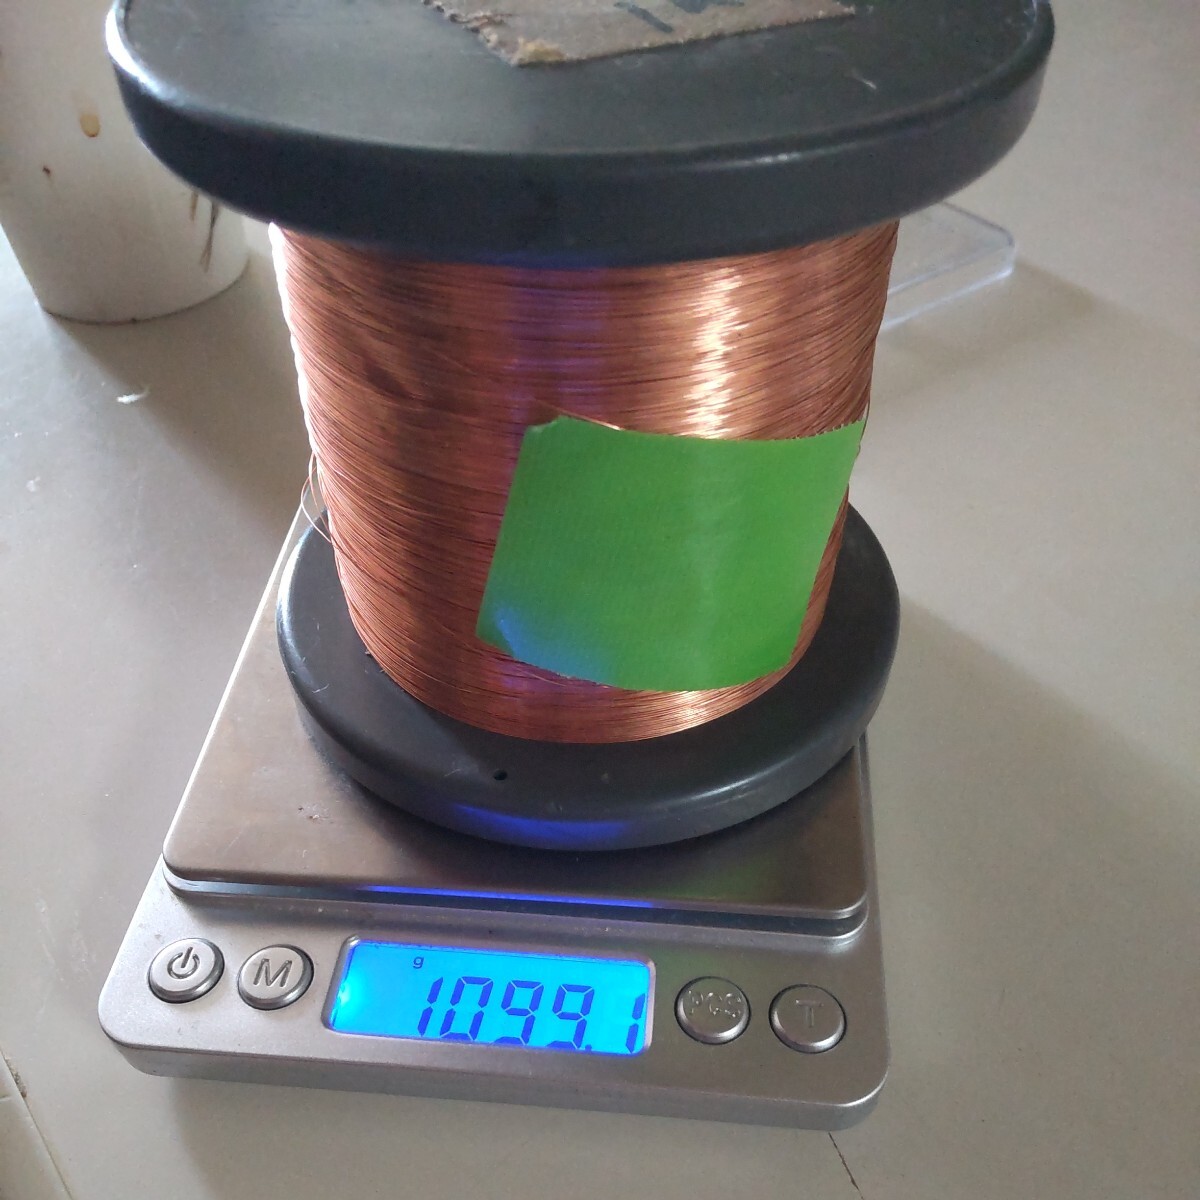  enamel copper line 0,23. tweeter voice coil and so on 